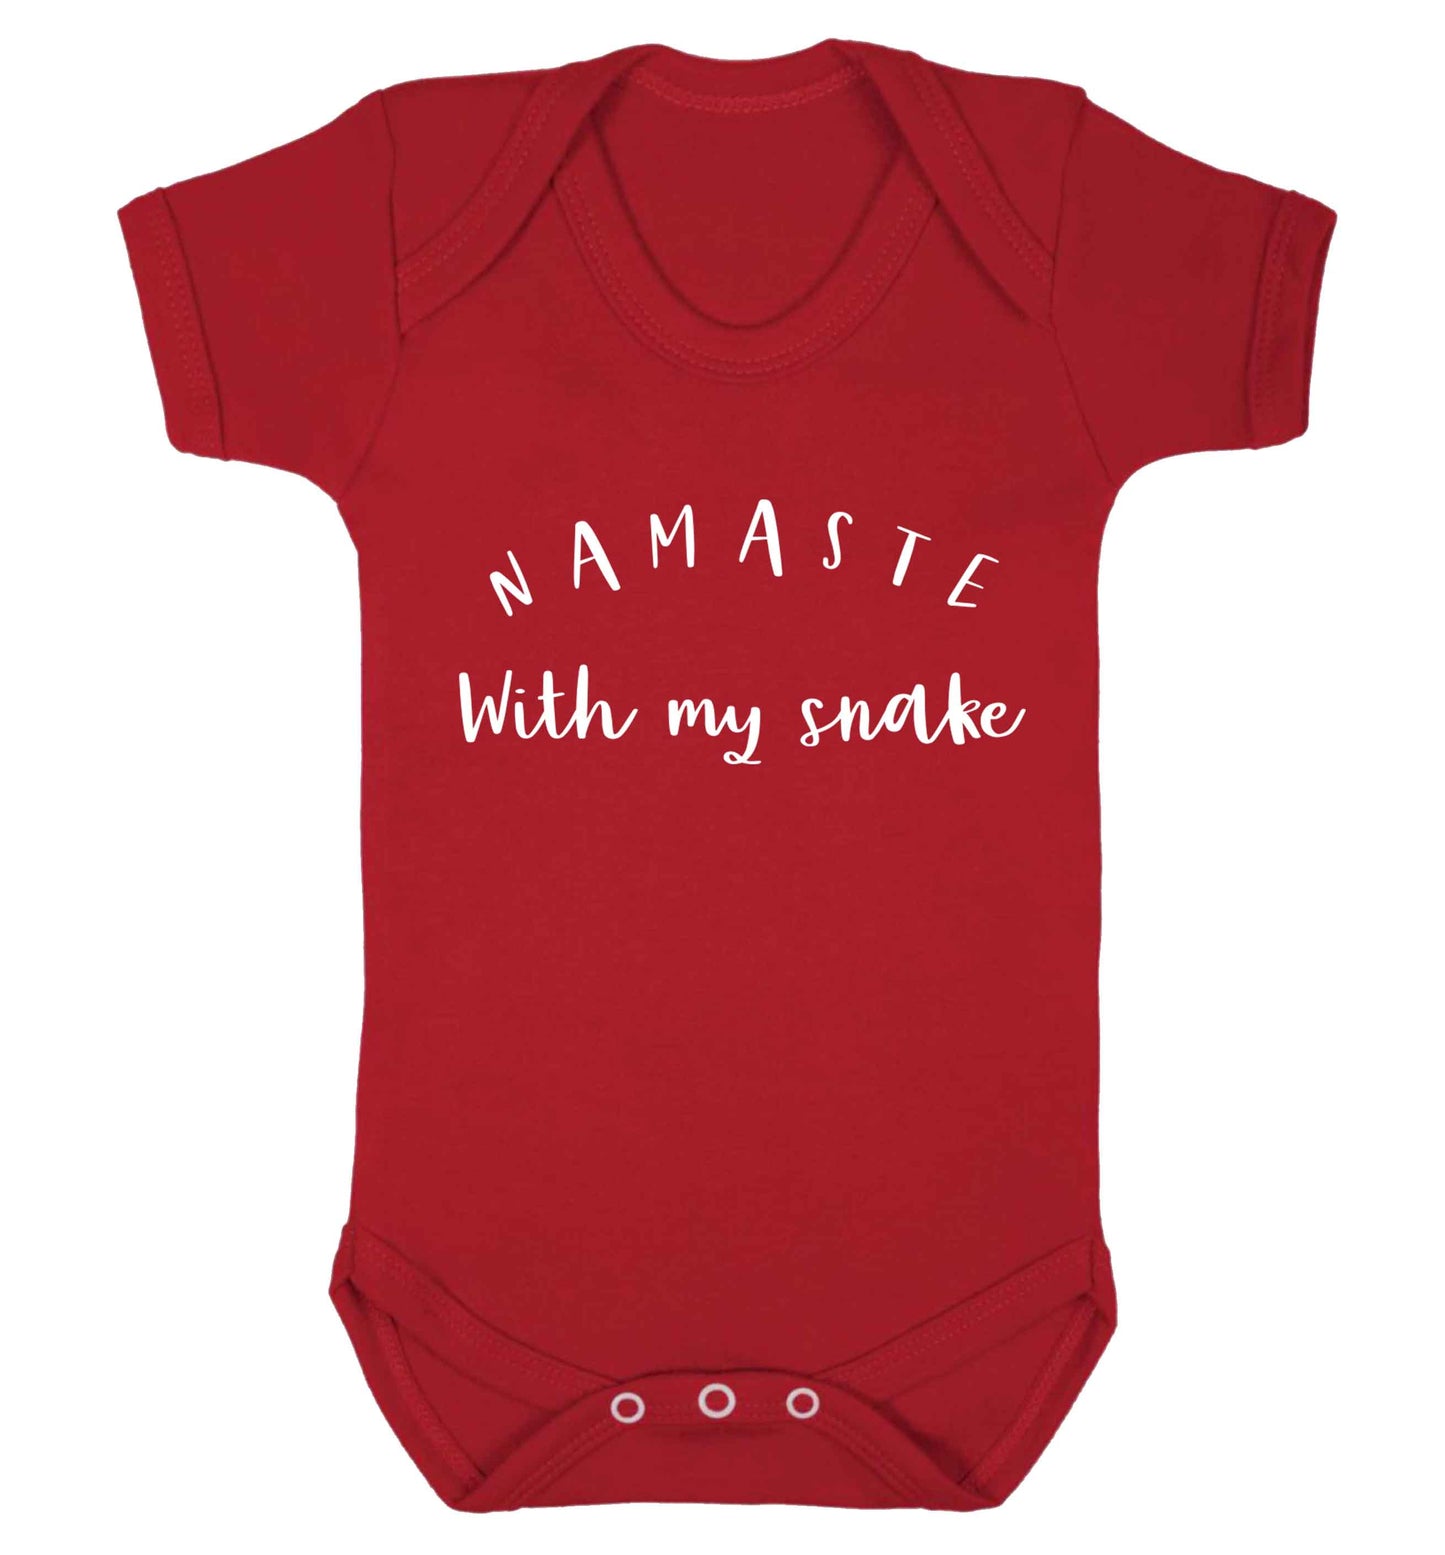 Namaste with my snake Baby Vest red 18-24 months